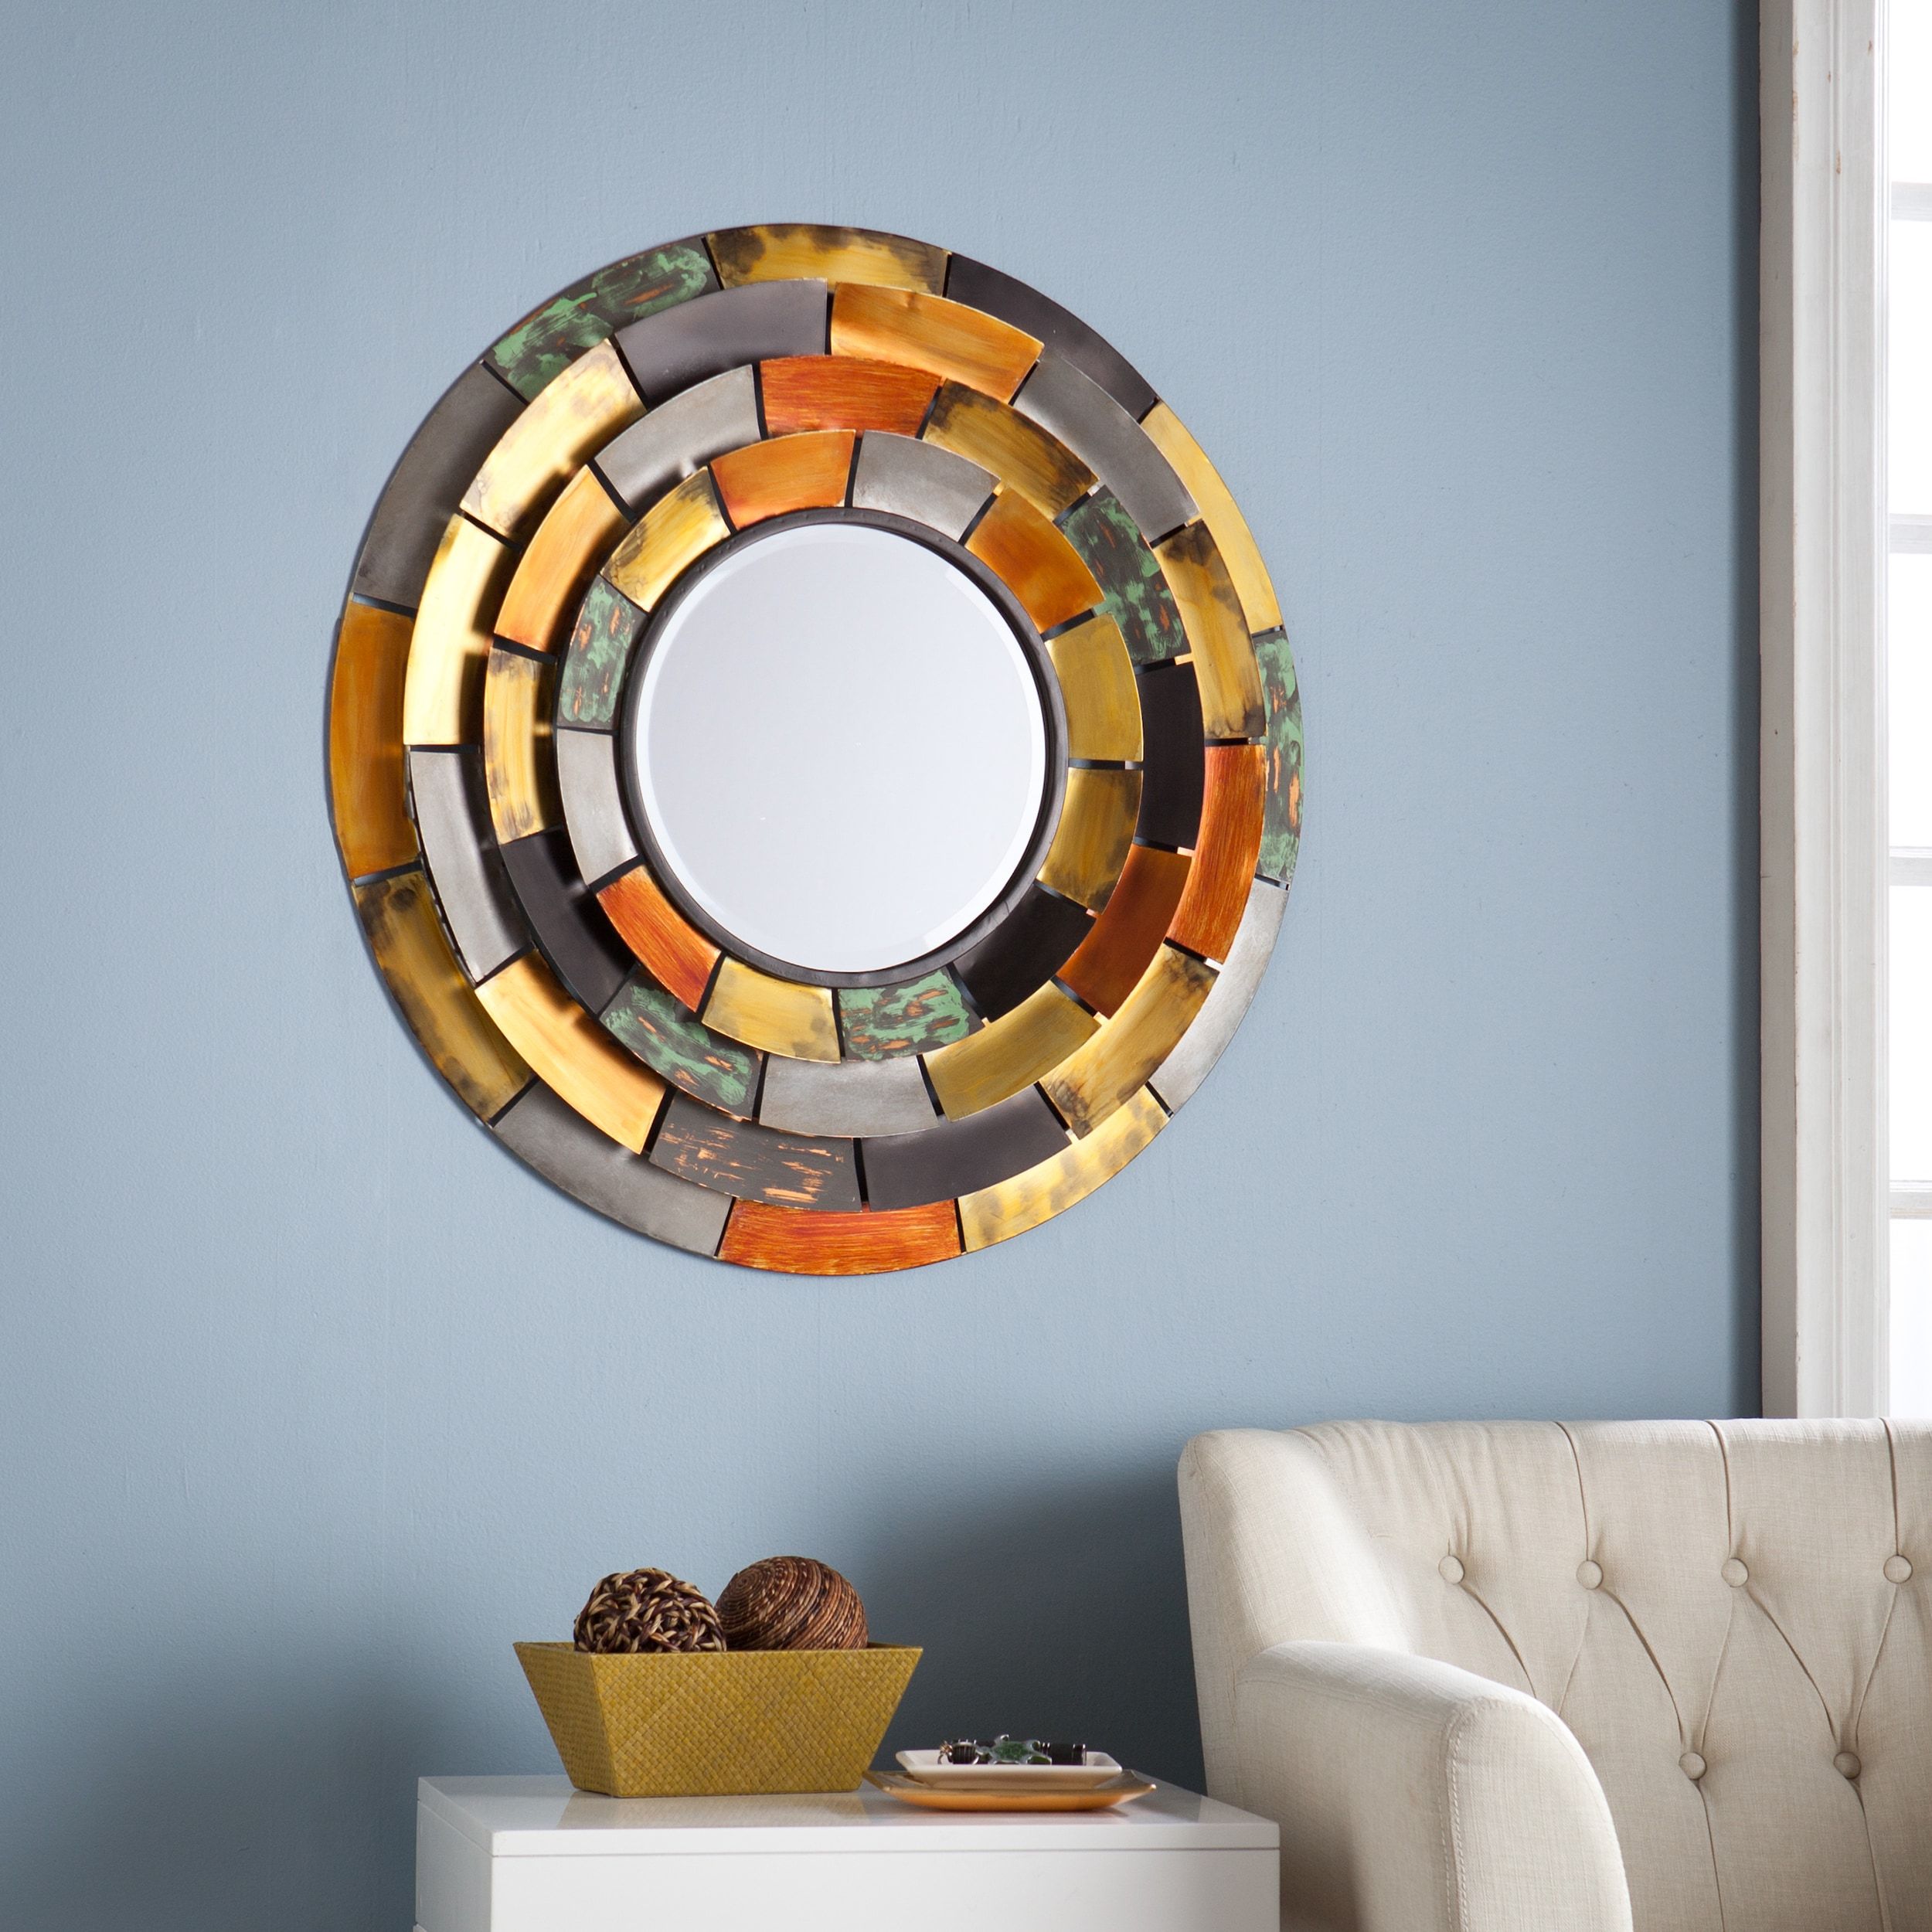 The Curated Nomad Lotta Decorative Wall Mirror With Tiered Edges | Ebay Inside Reba Accent Wall Mirrors (View 14 of 15)